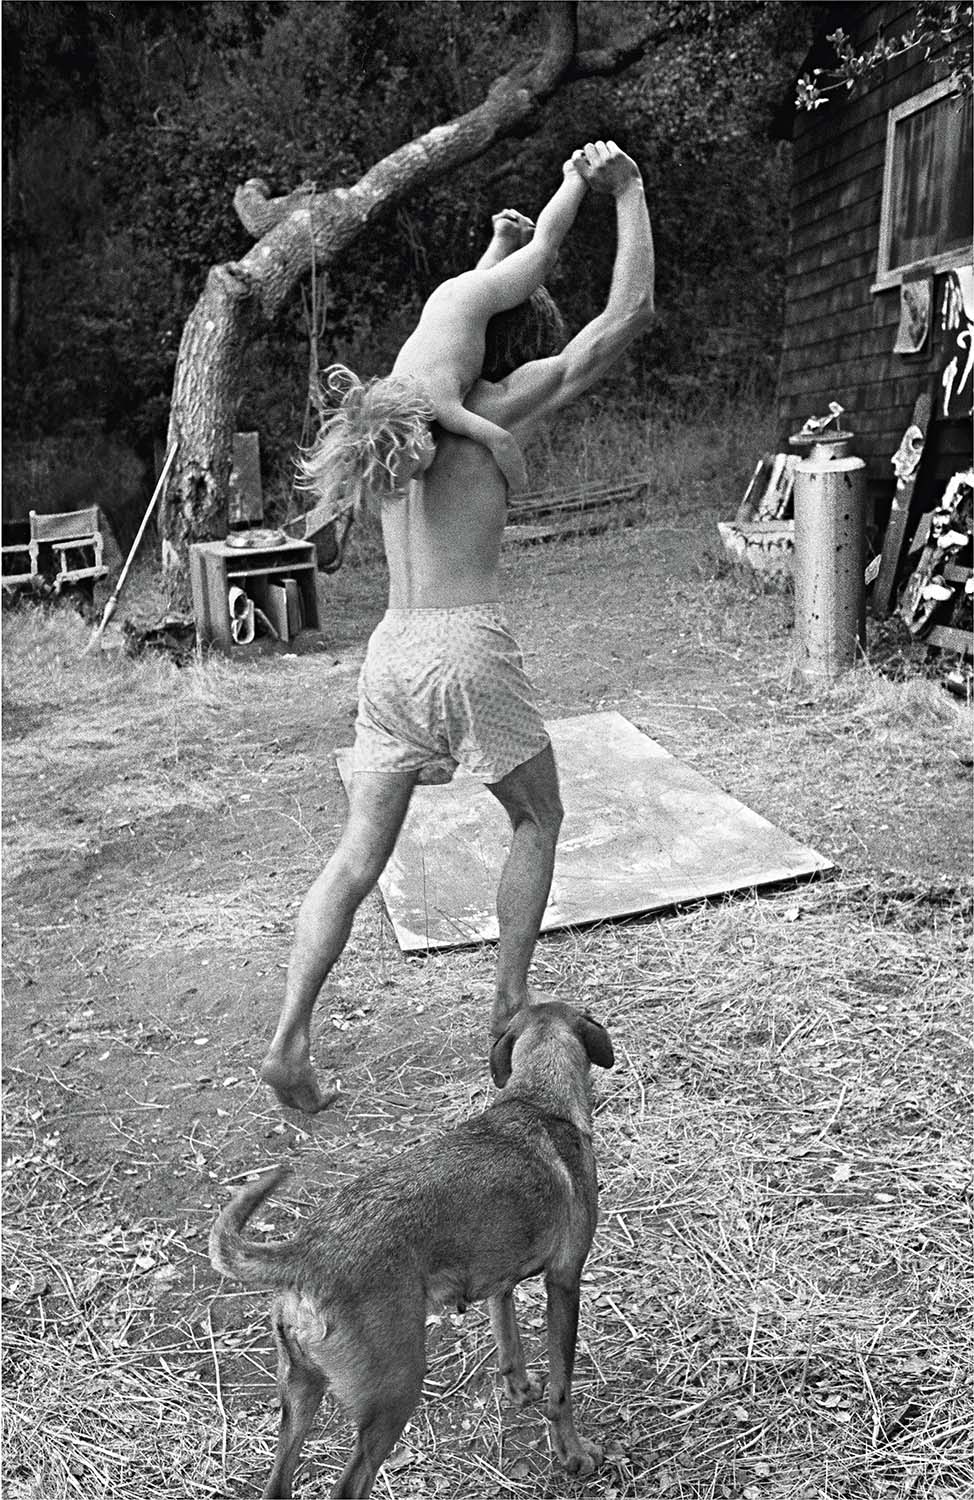  GEORGE HERMS   Playing with his daughter  ,   Topanga Canyon, California, 1963  